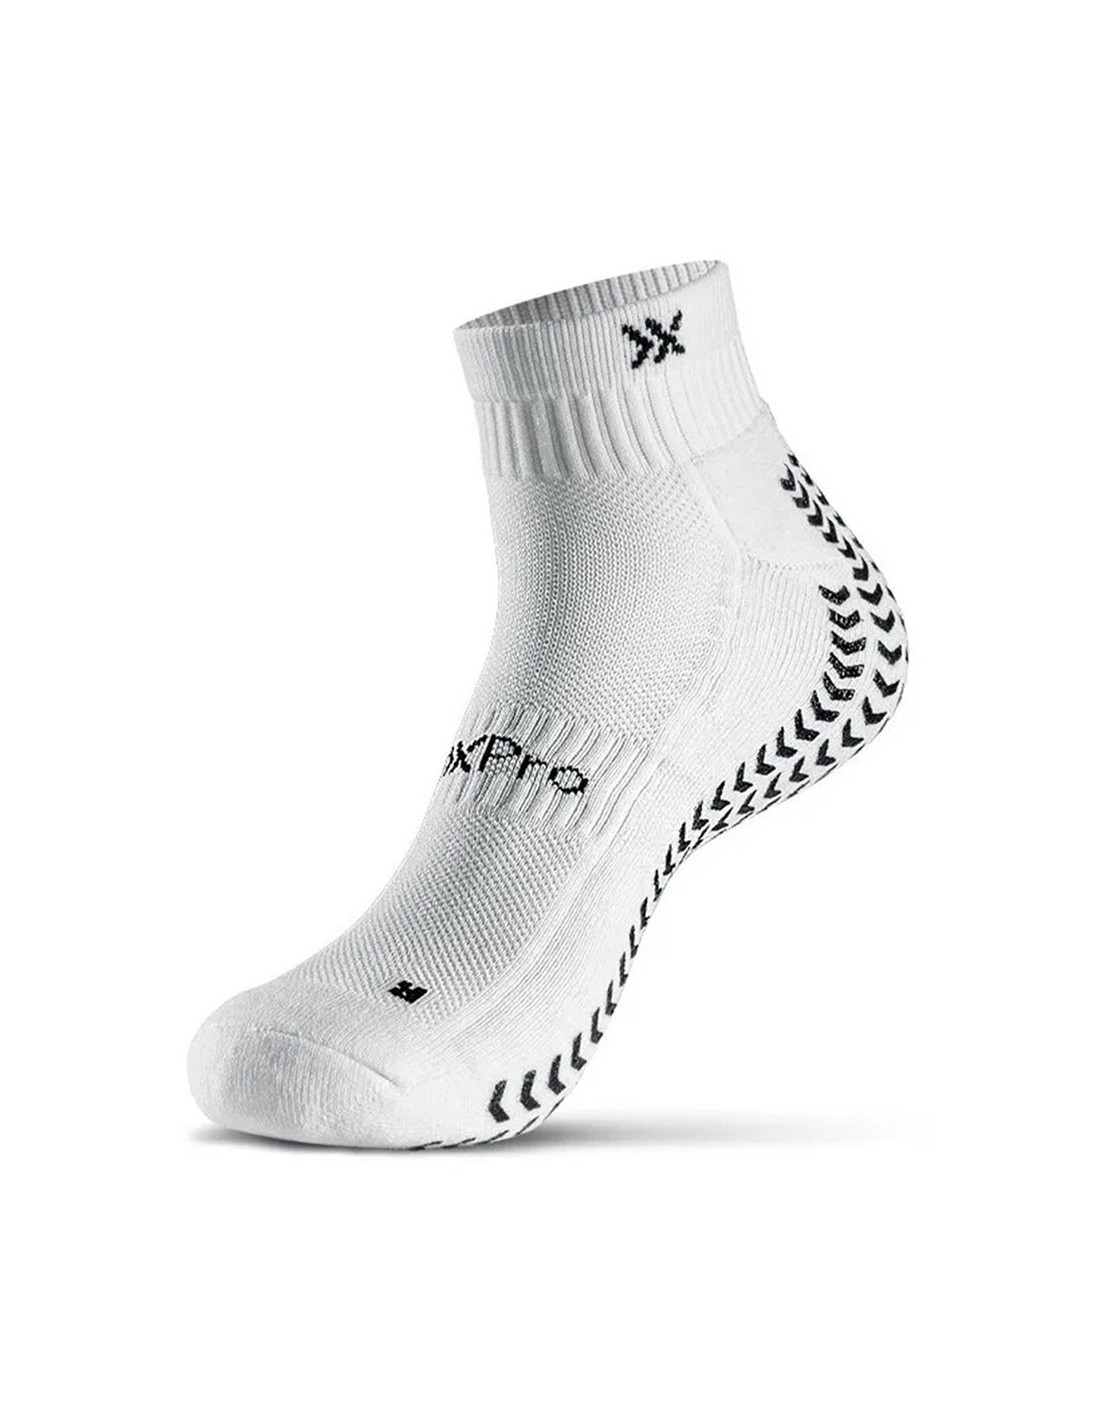 Calcetines Soxpro Low Cut Blanco, Meias remo